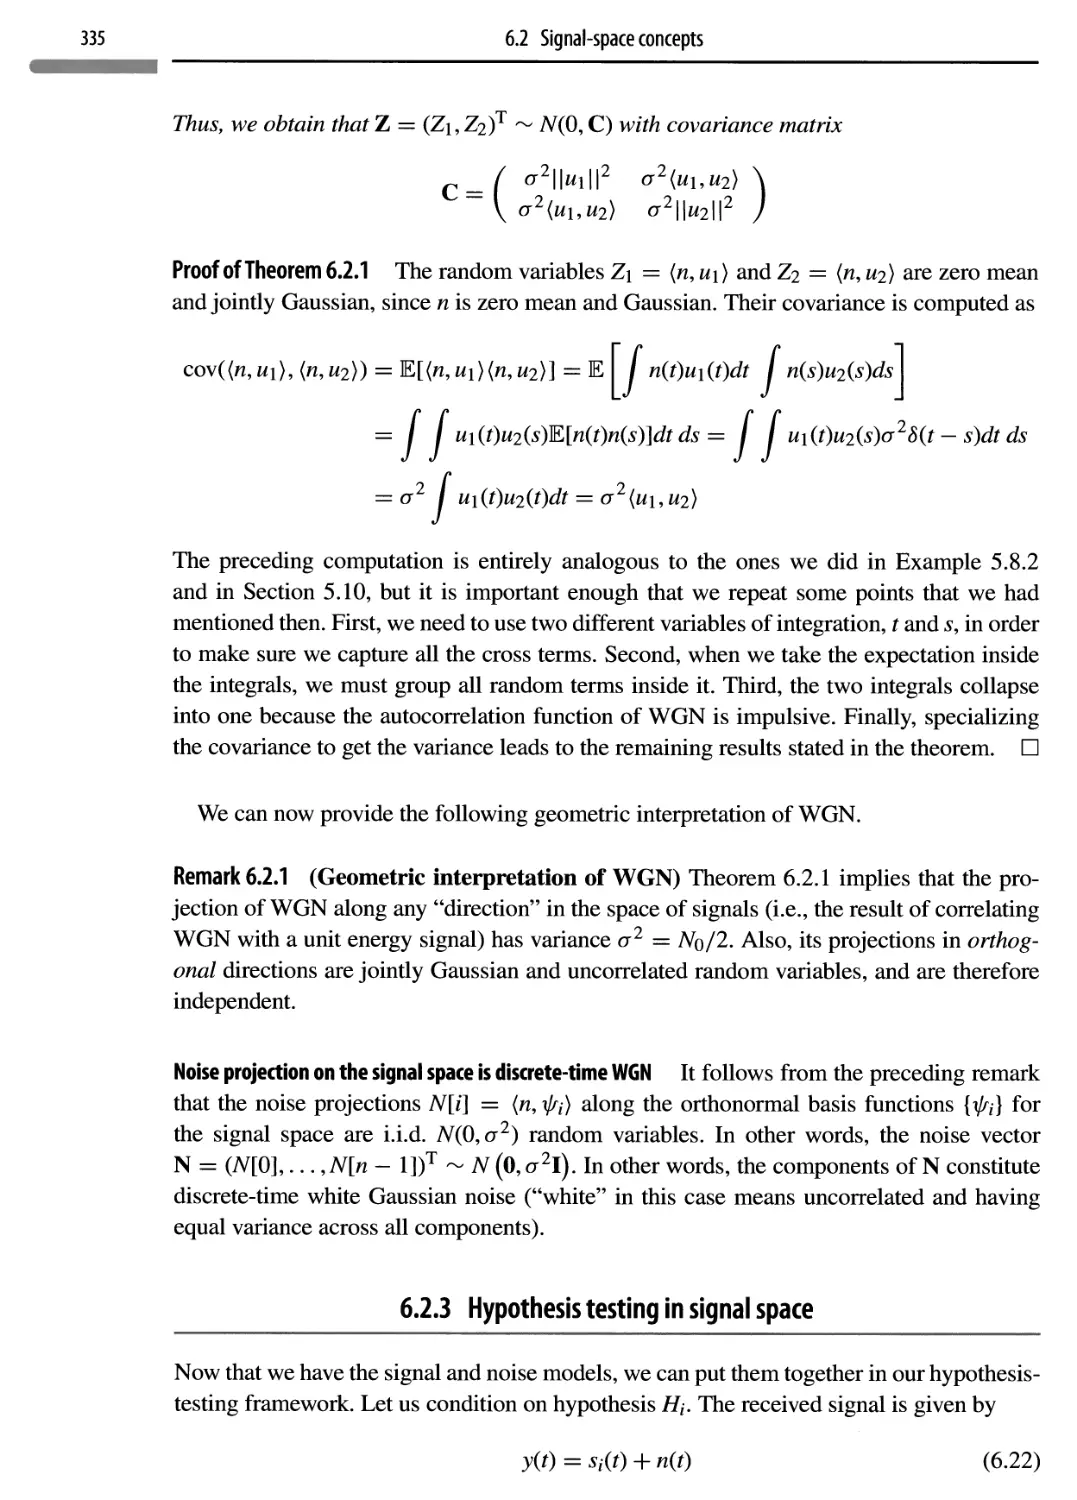 6.2.3 Hypothesis testing in signal space 335